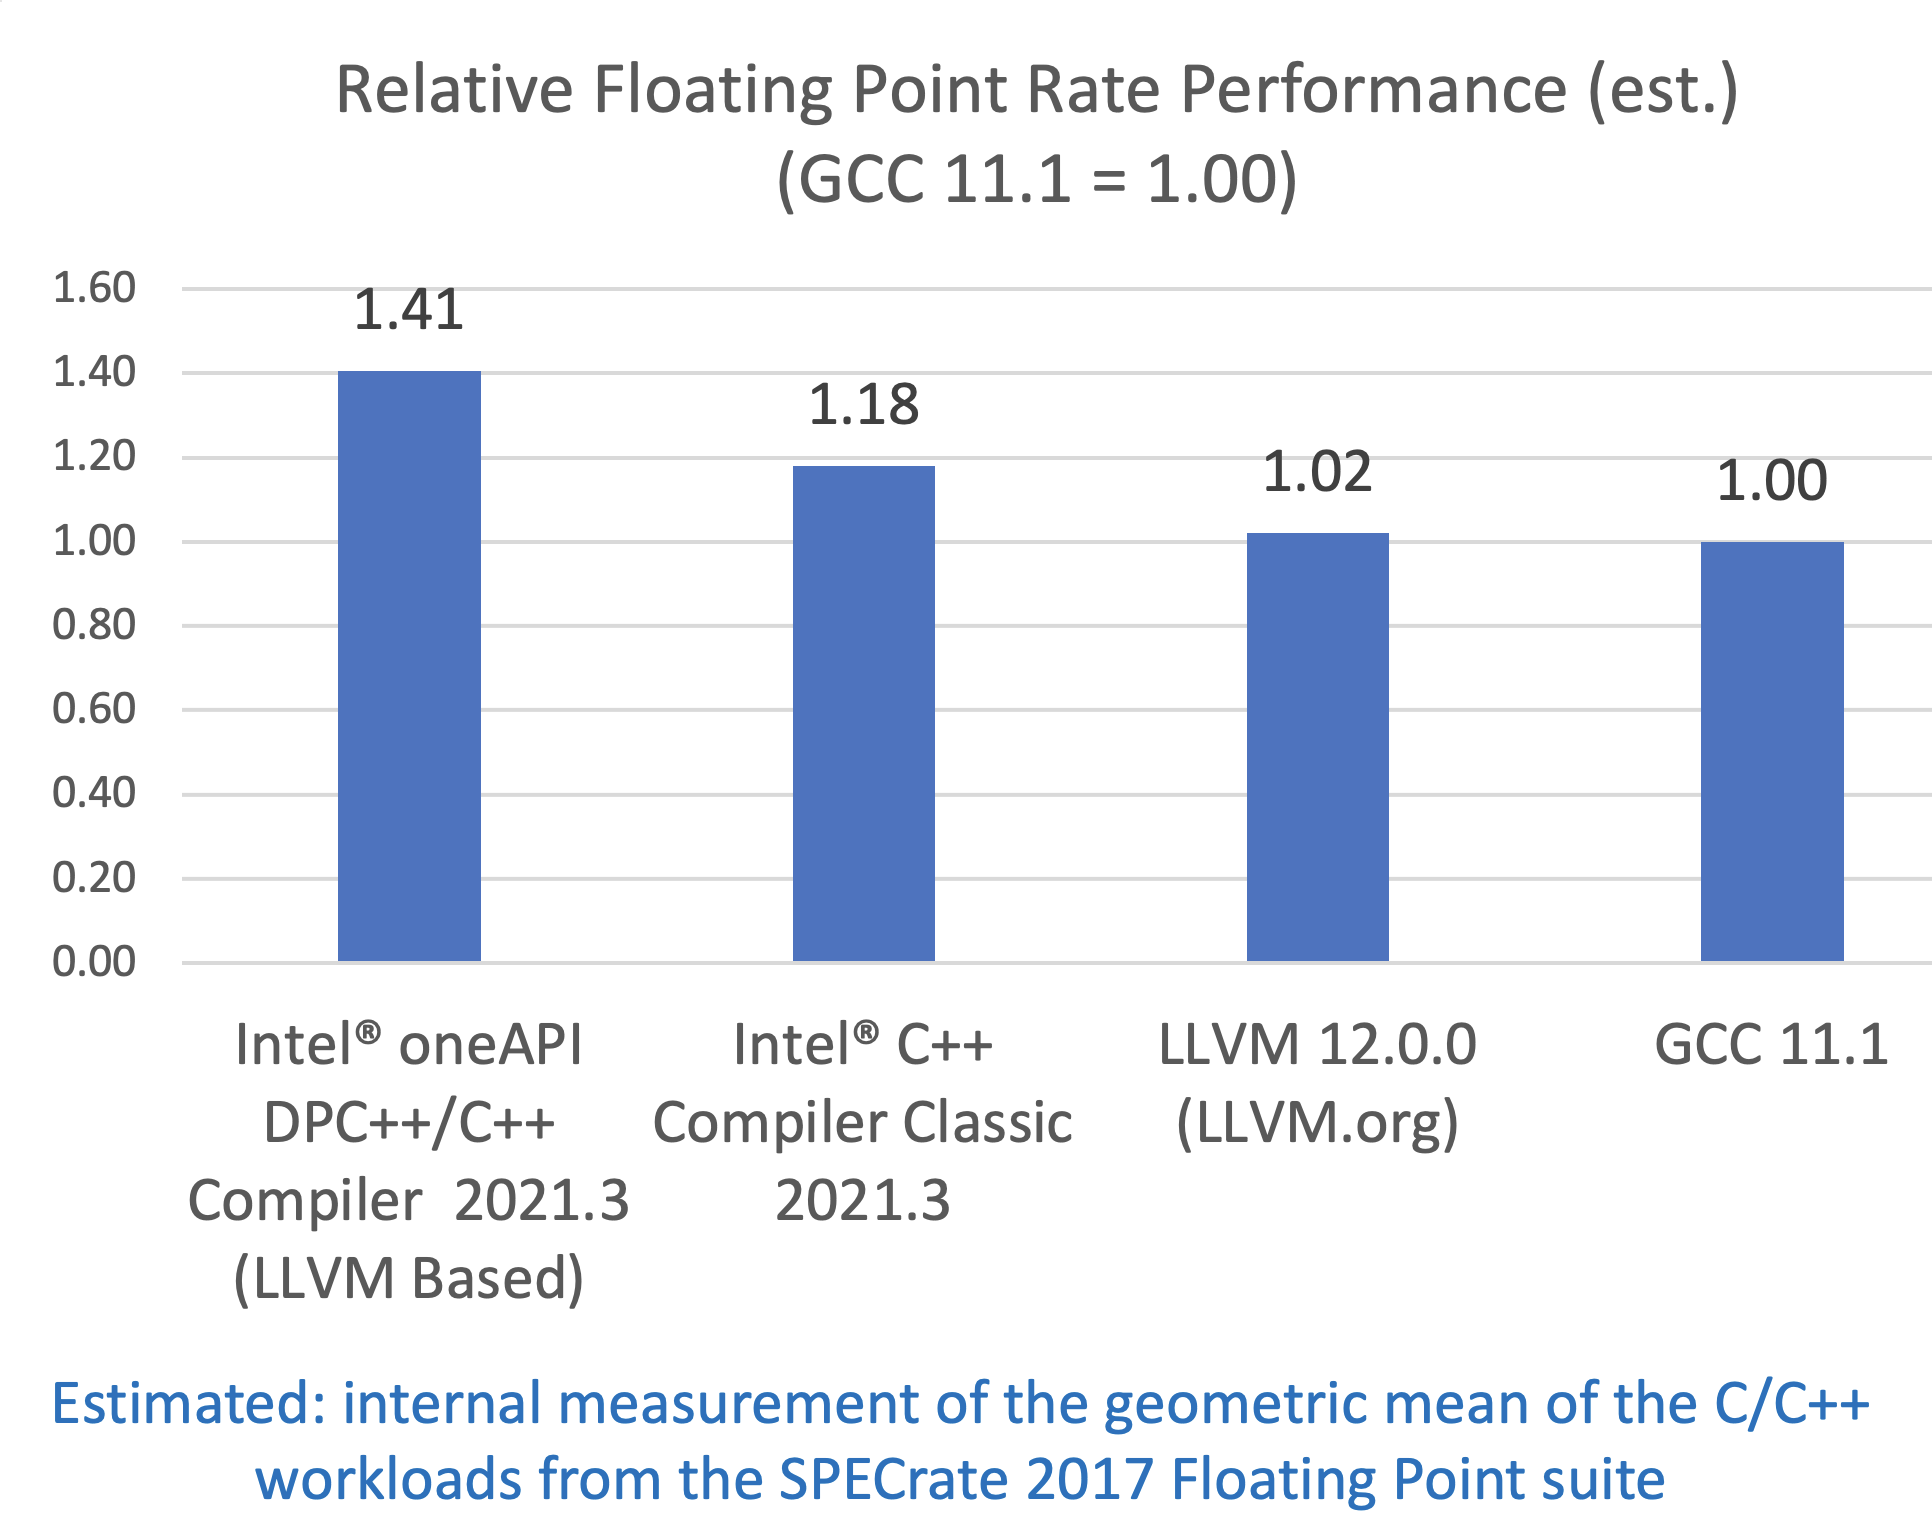 SPECrate 2017 INT (Estimated) Performance advantage relative to other compilers on Intel® Xeon Platinum 8380 Processor